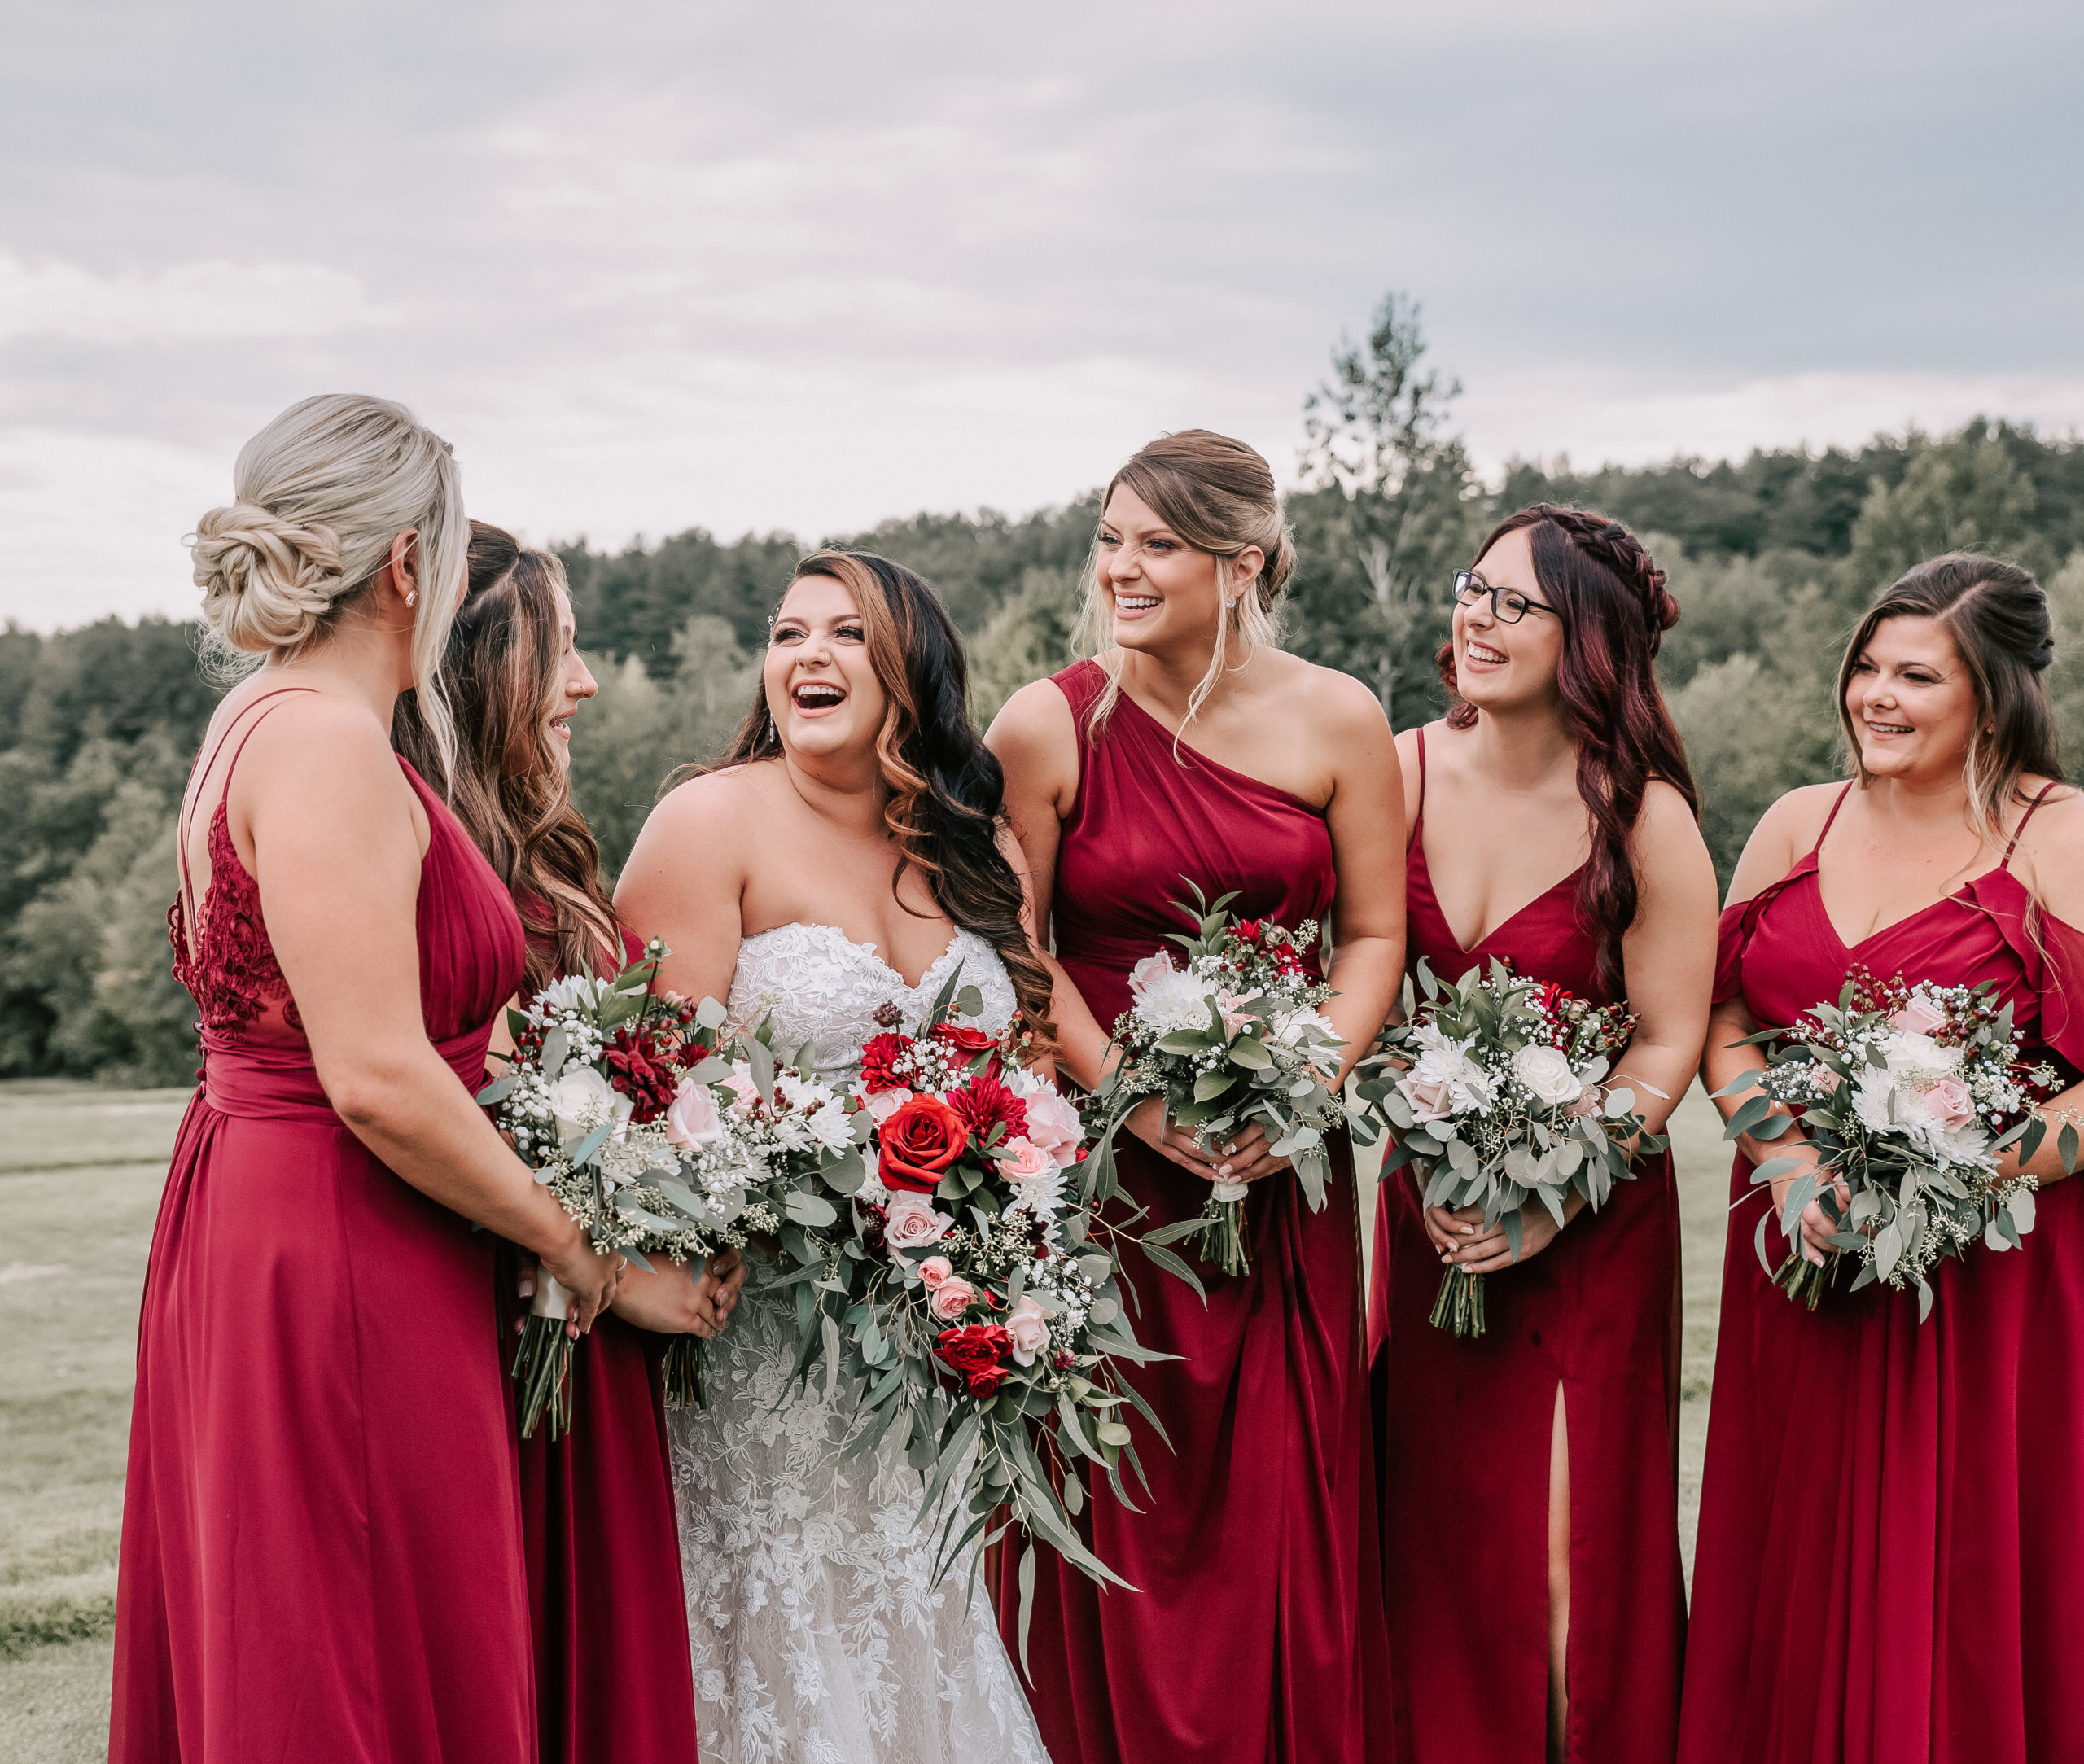 bride and bridesmaids laughing together at new hampshire wedding - by Vivid Instincts Photography, a New England wedding photographer